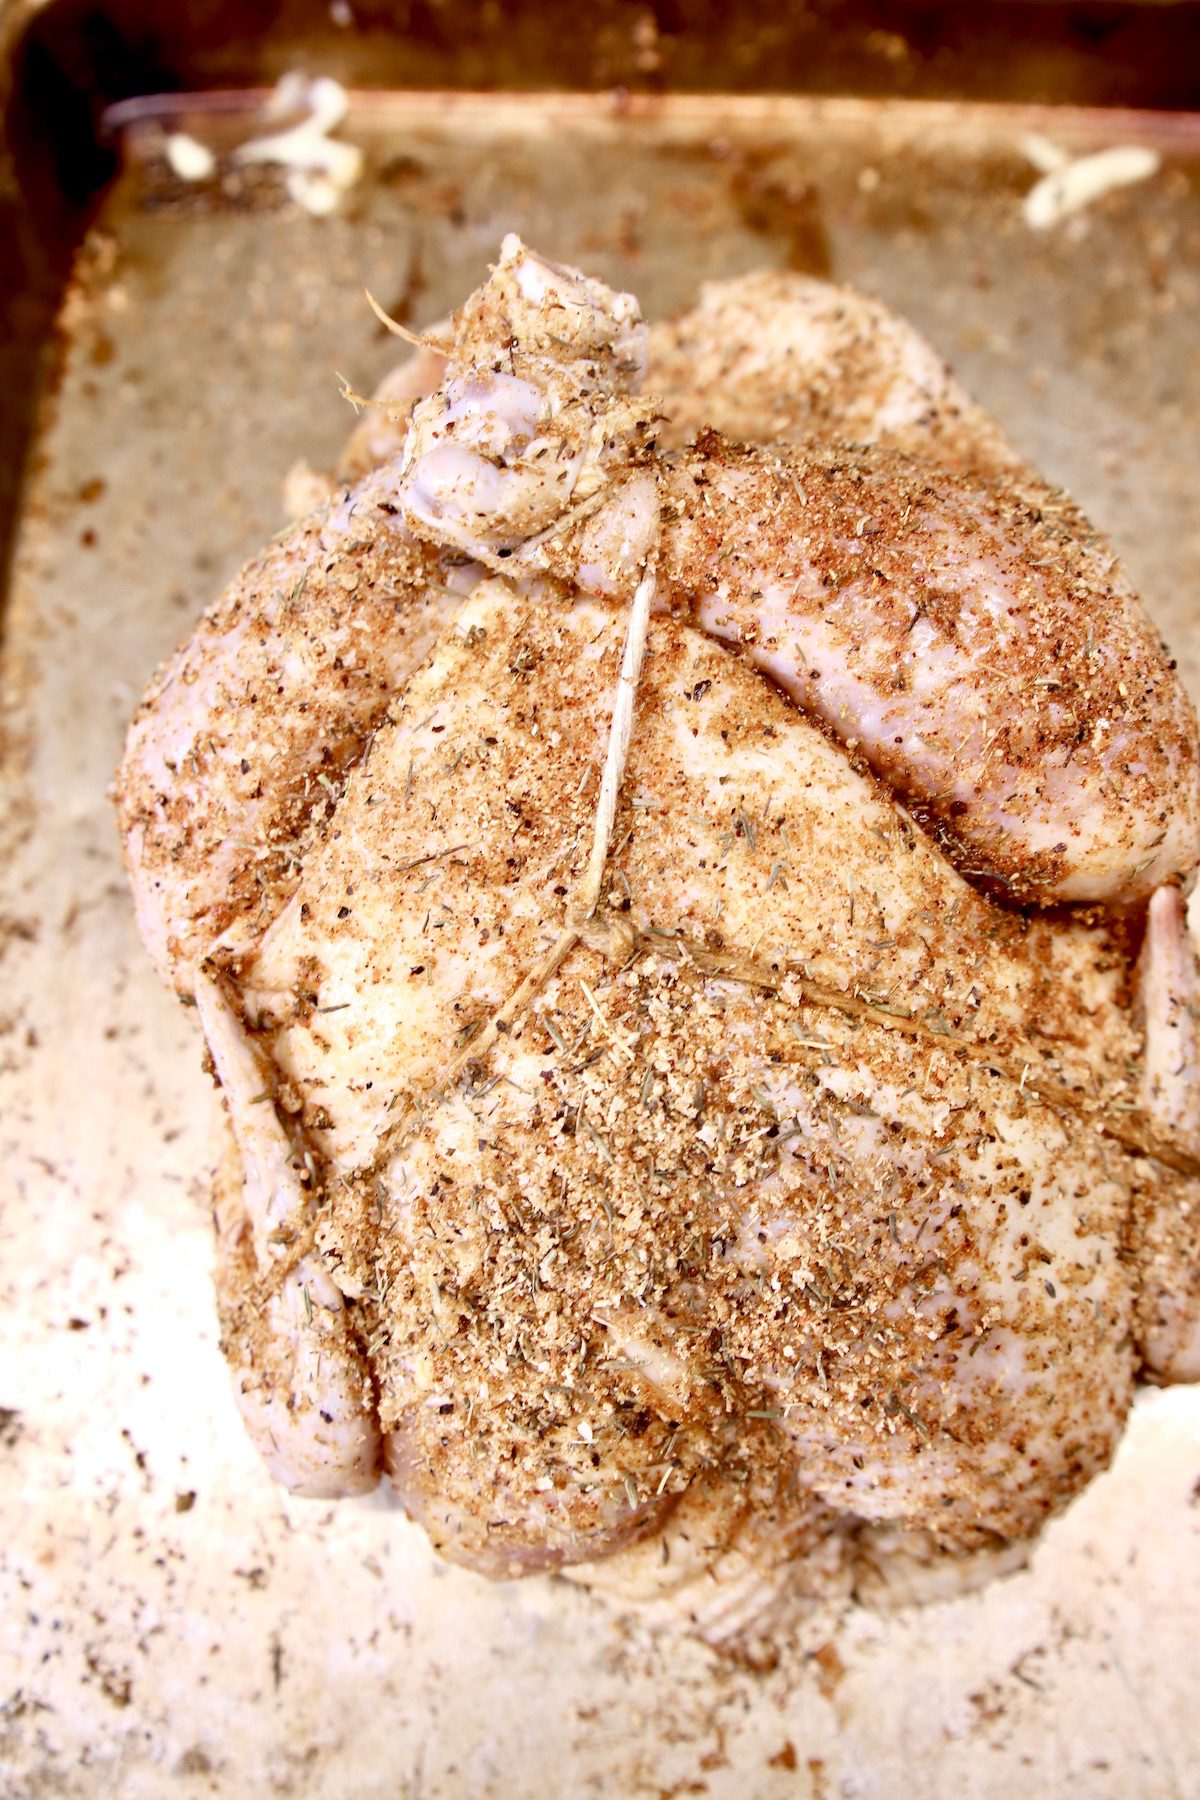 Seasoned chicken - tied up ready to grill